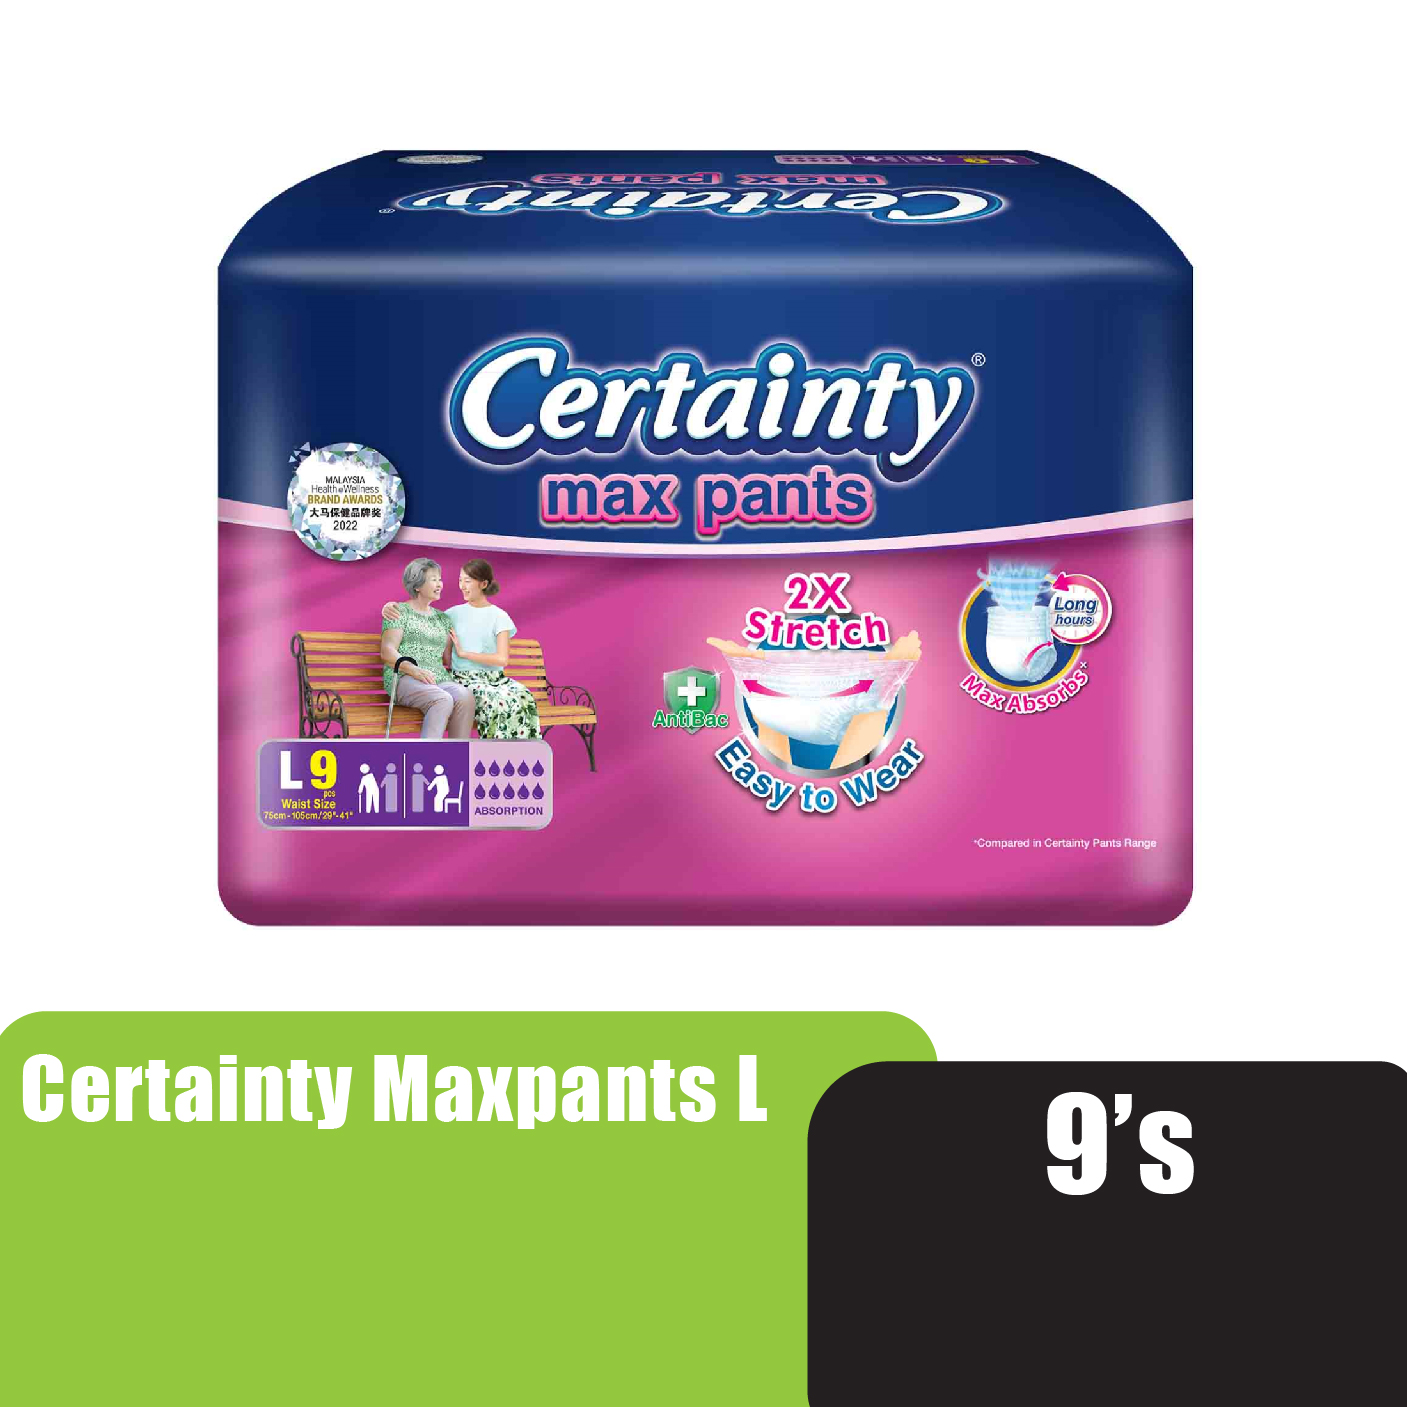 CERTAINTY Maxpants Adult Diapers 9's Size - L, Adult Diapers Pants / Pampers Dewasa / 成人 尿裤